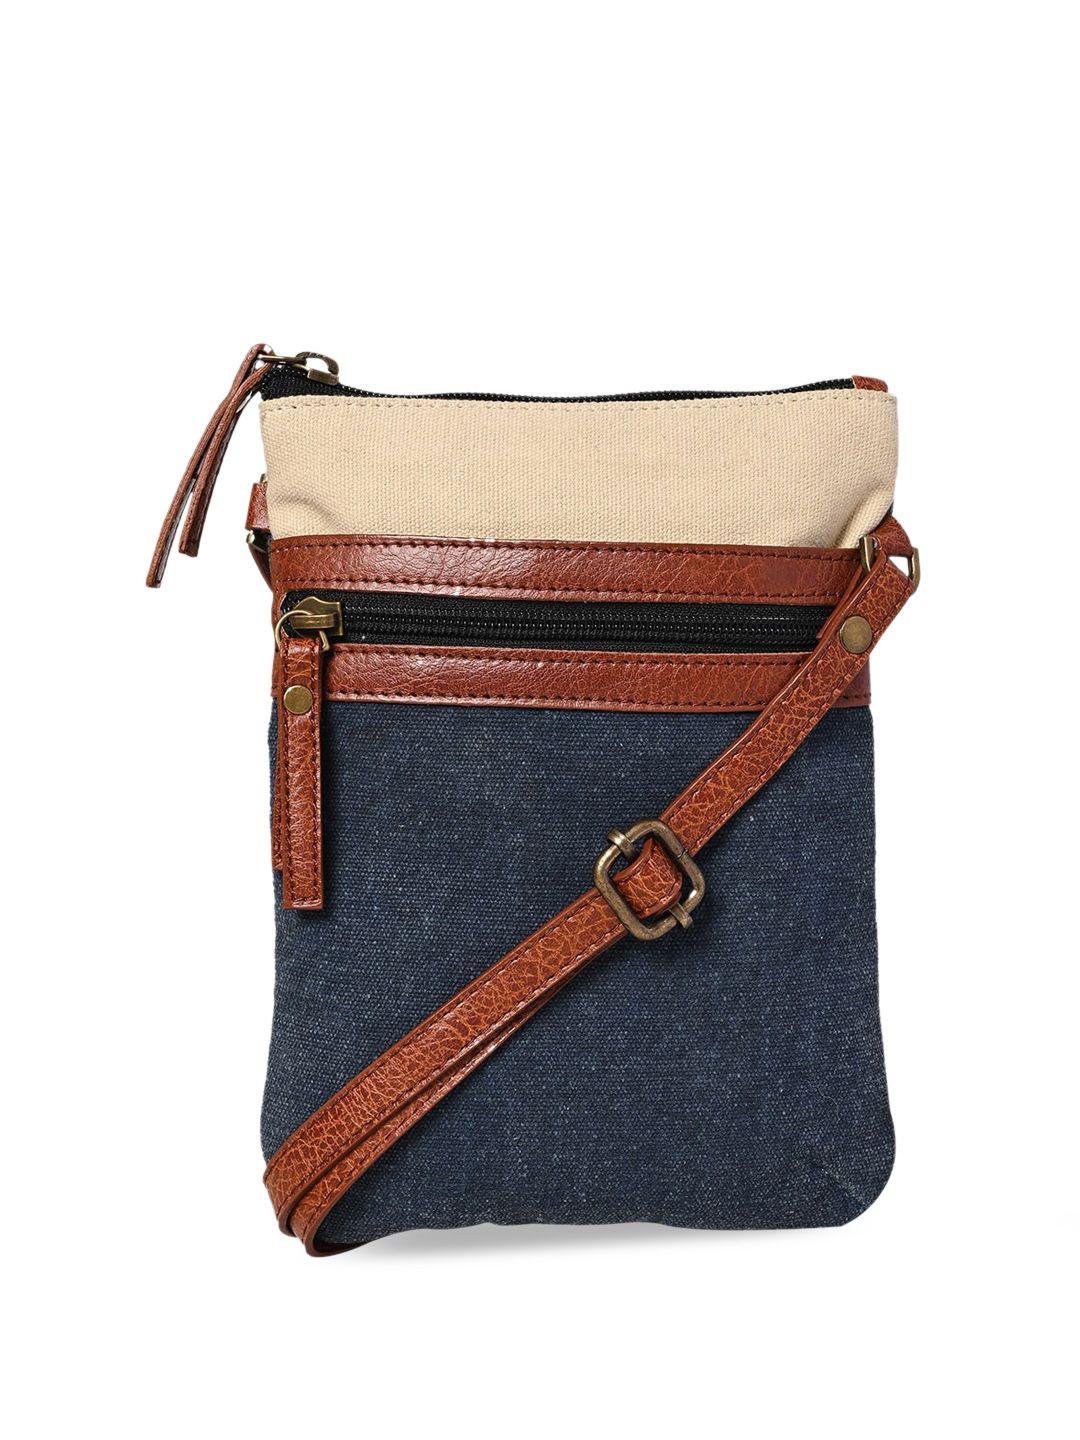 Mona B Navy Blue Structured Sling Bag with Tasselled